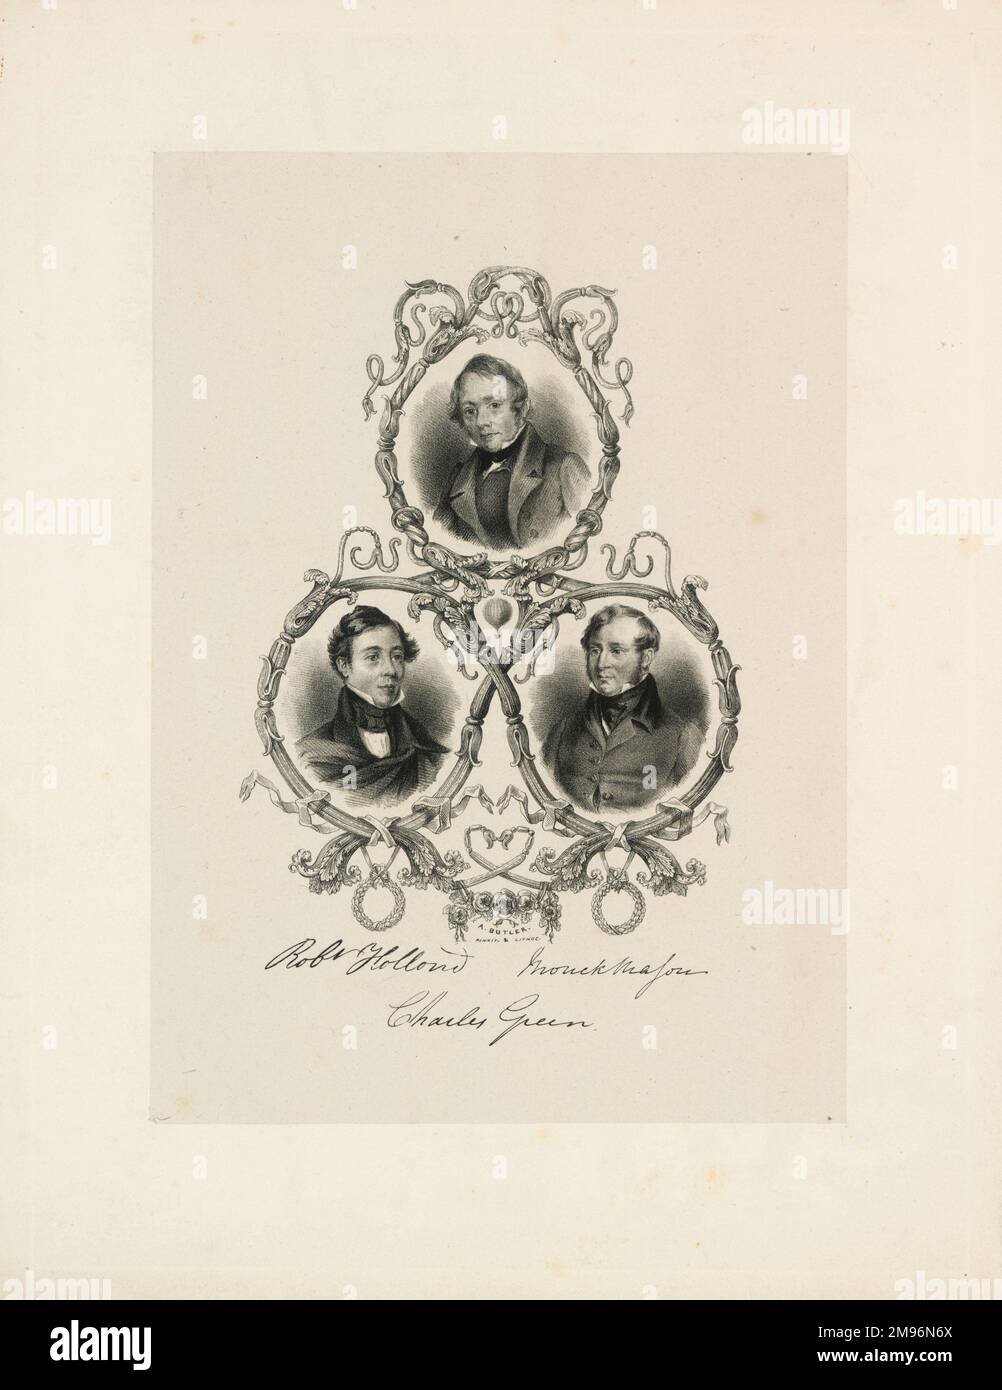 Three miniature portraits of ballooning personalities, arranged in a triangle, with a small balloon at the centre, and signatures below.  At the top is Charles Green (1785-1870), lower left Robert Hollond (1808-1877) and lower right Thomas Monck Mason (1803-1889). Stock Photo